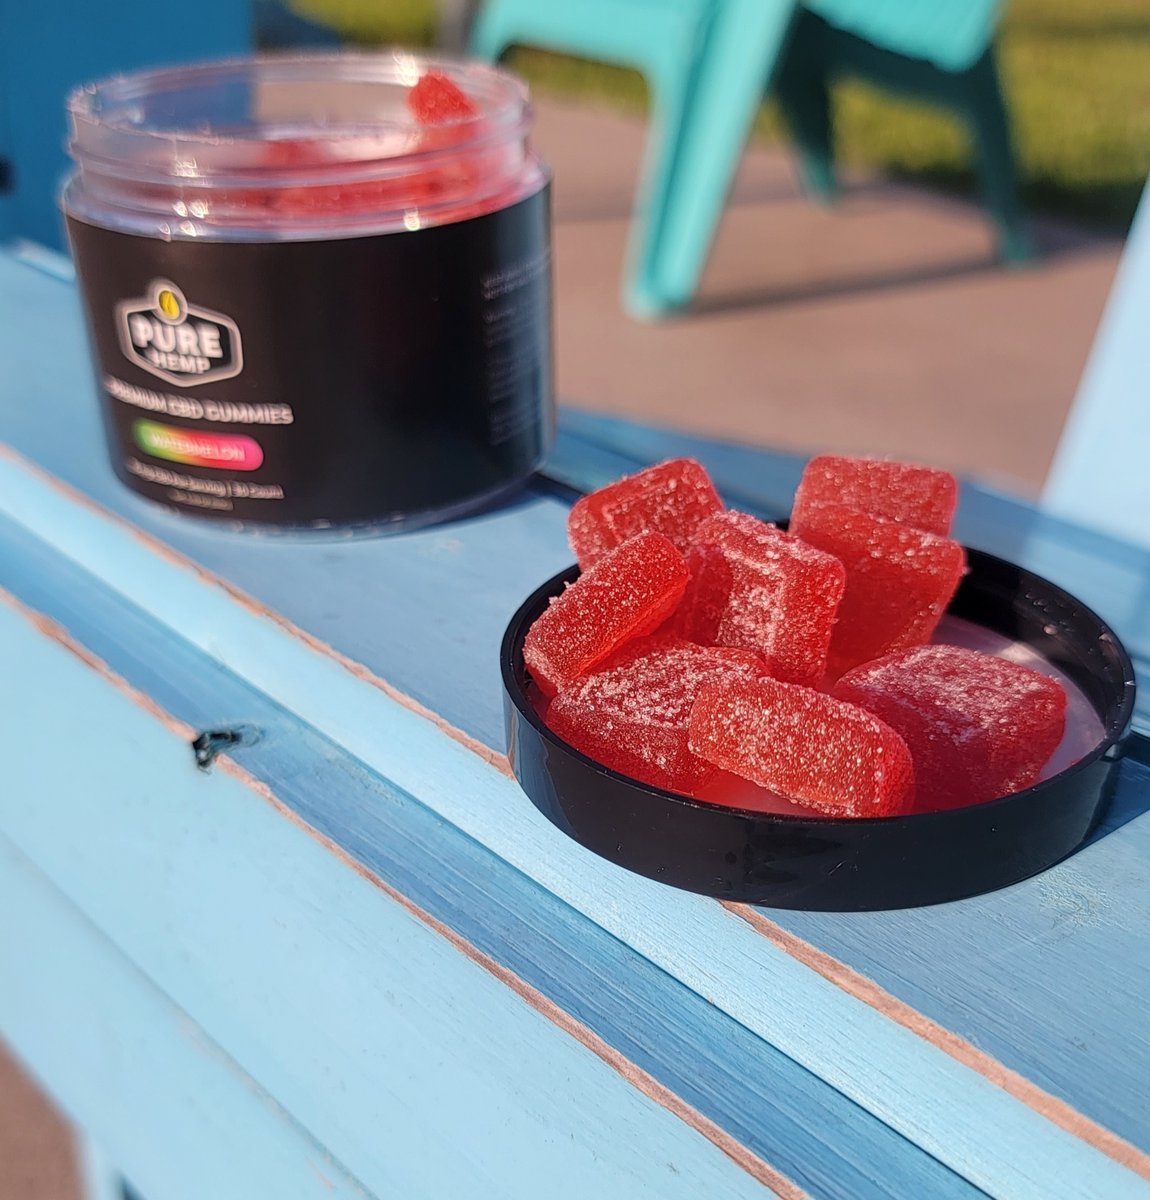 Satisfy your craving for sweet bliss with our juicy watermelon CBD gummies. 
You'll forget all your worries with just one bite.

#purehempshop #purehemp #cbd #delta8  #wellness  #cbdgummies #photooftheday #edibles #enjoylife #watermelon #bliss #summertime